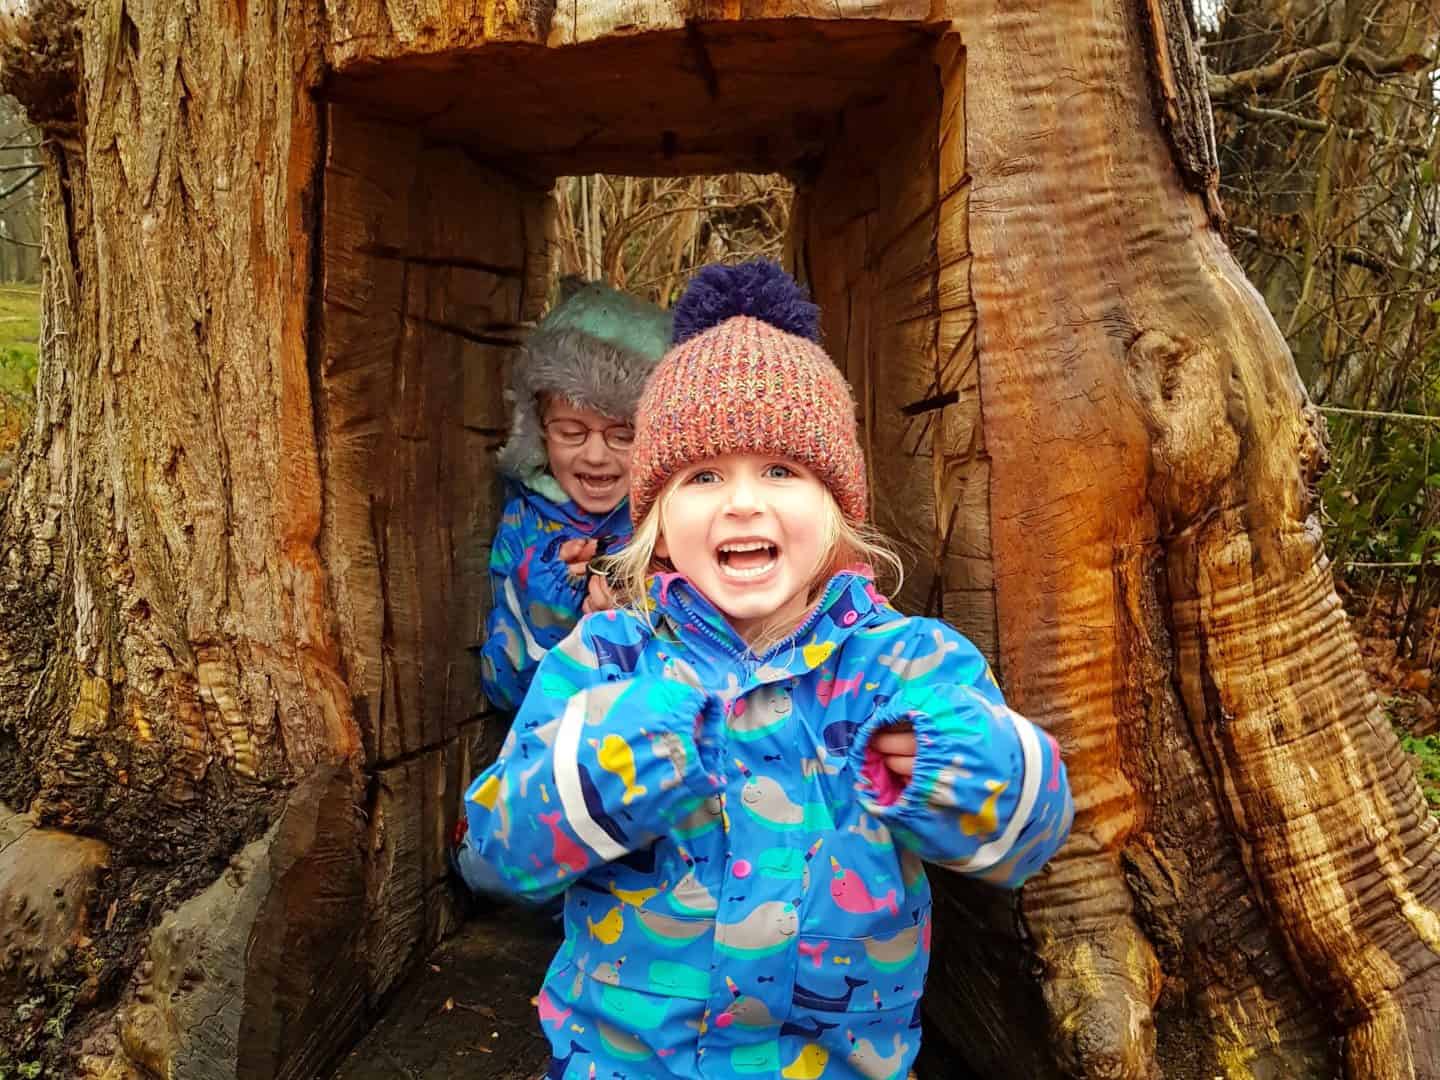 Two girls in blue coats, Libby and Lia, playing inside a tree trunk with a rectangular hole cut out of it at Croft Castle in Herefordshire